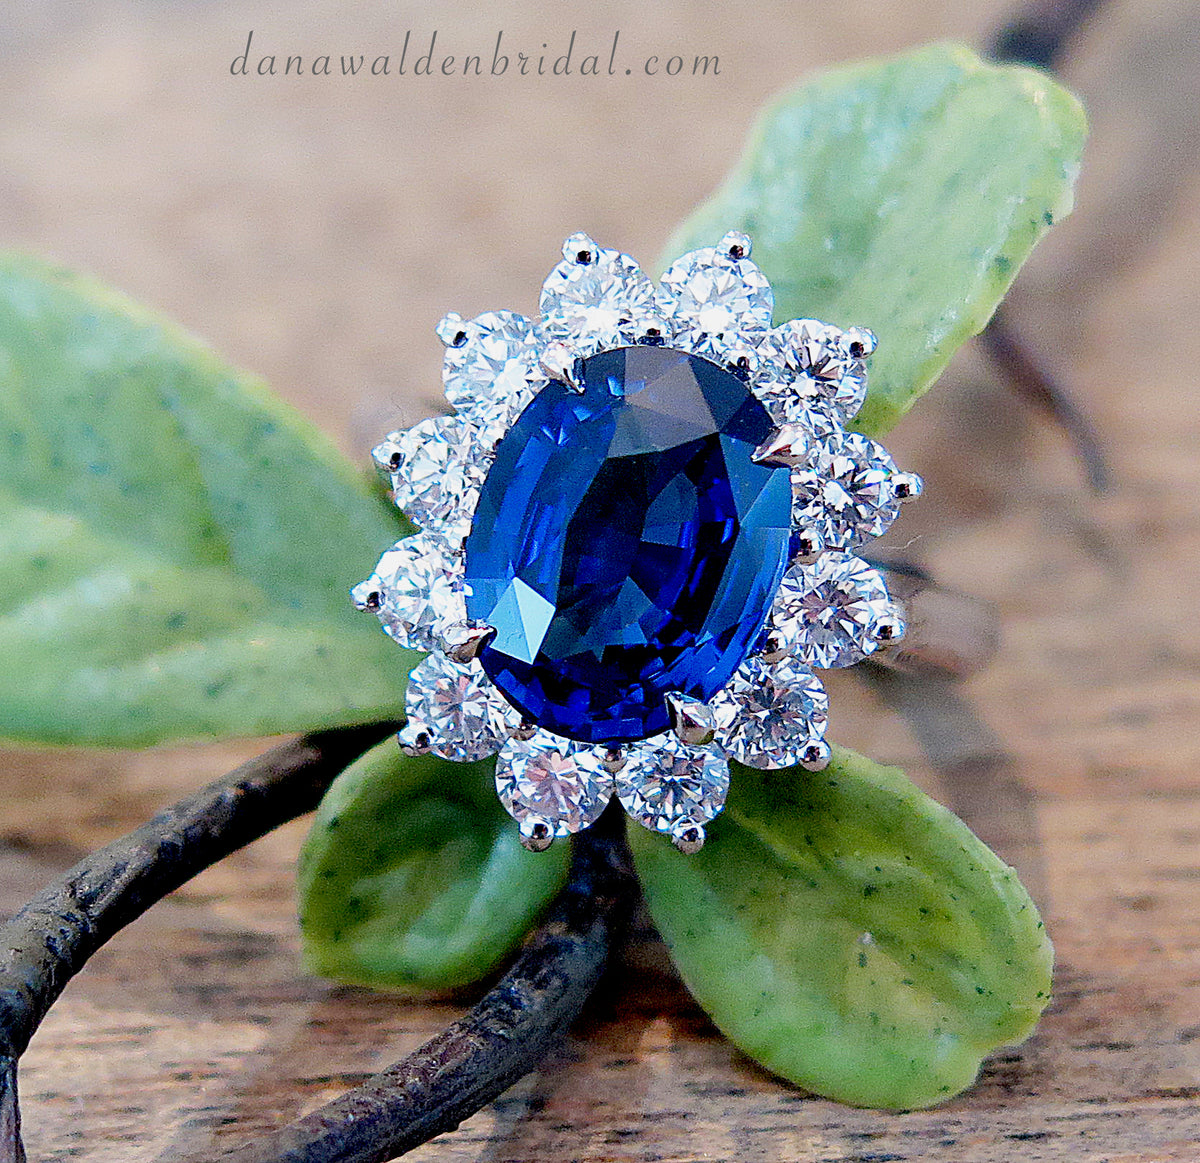 Oval Blue Sapphire Pendant with Diamond Accents